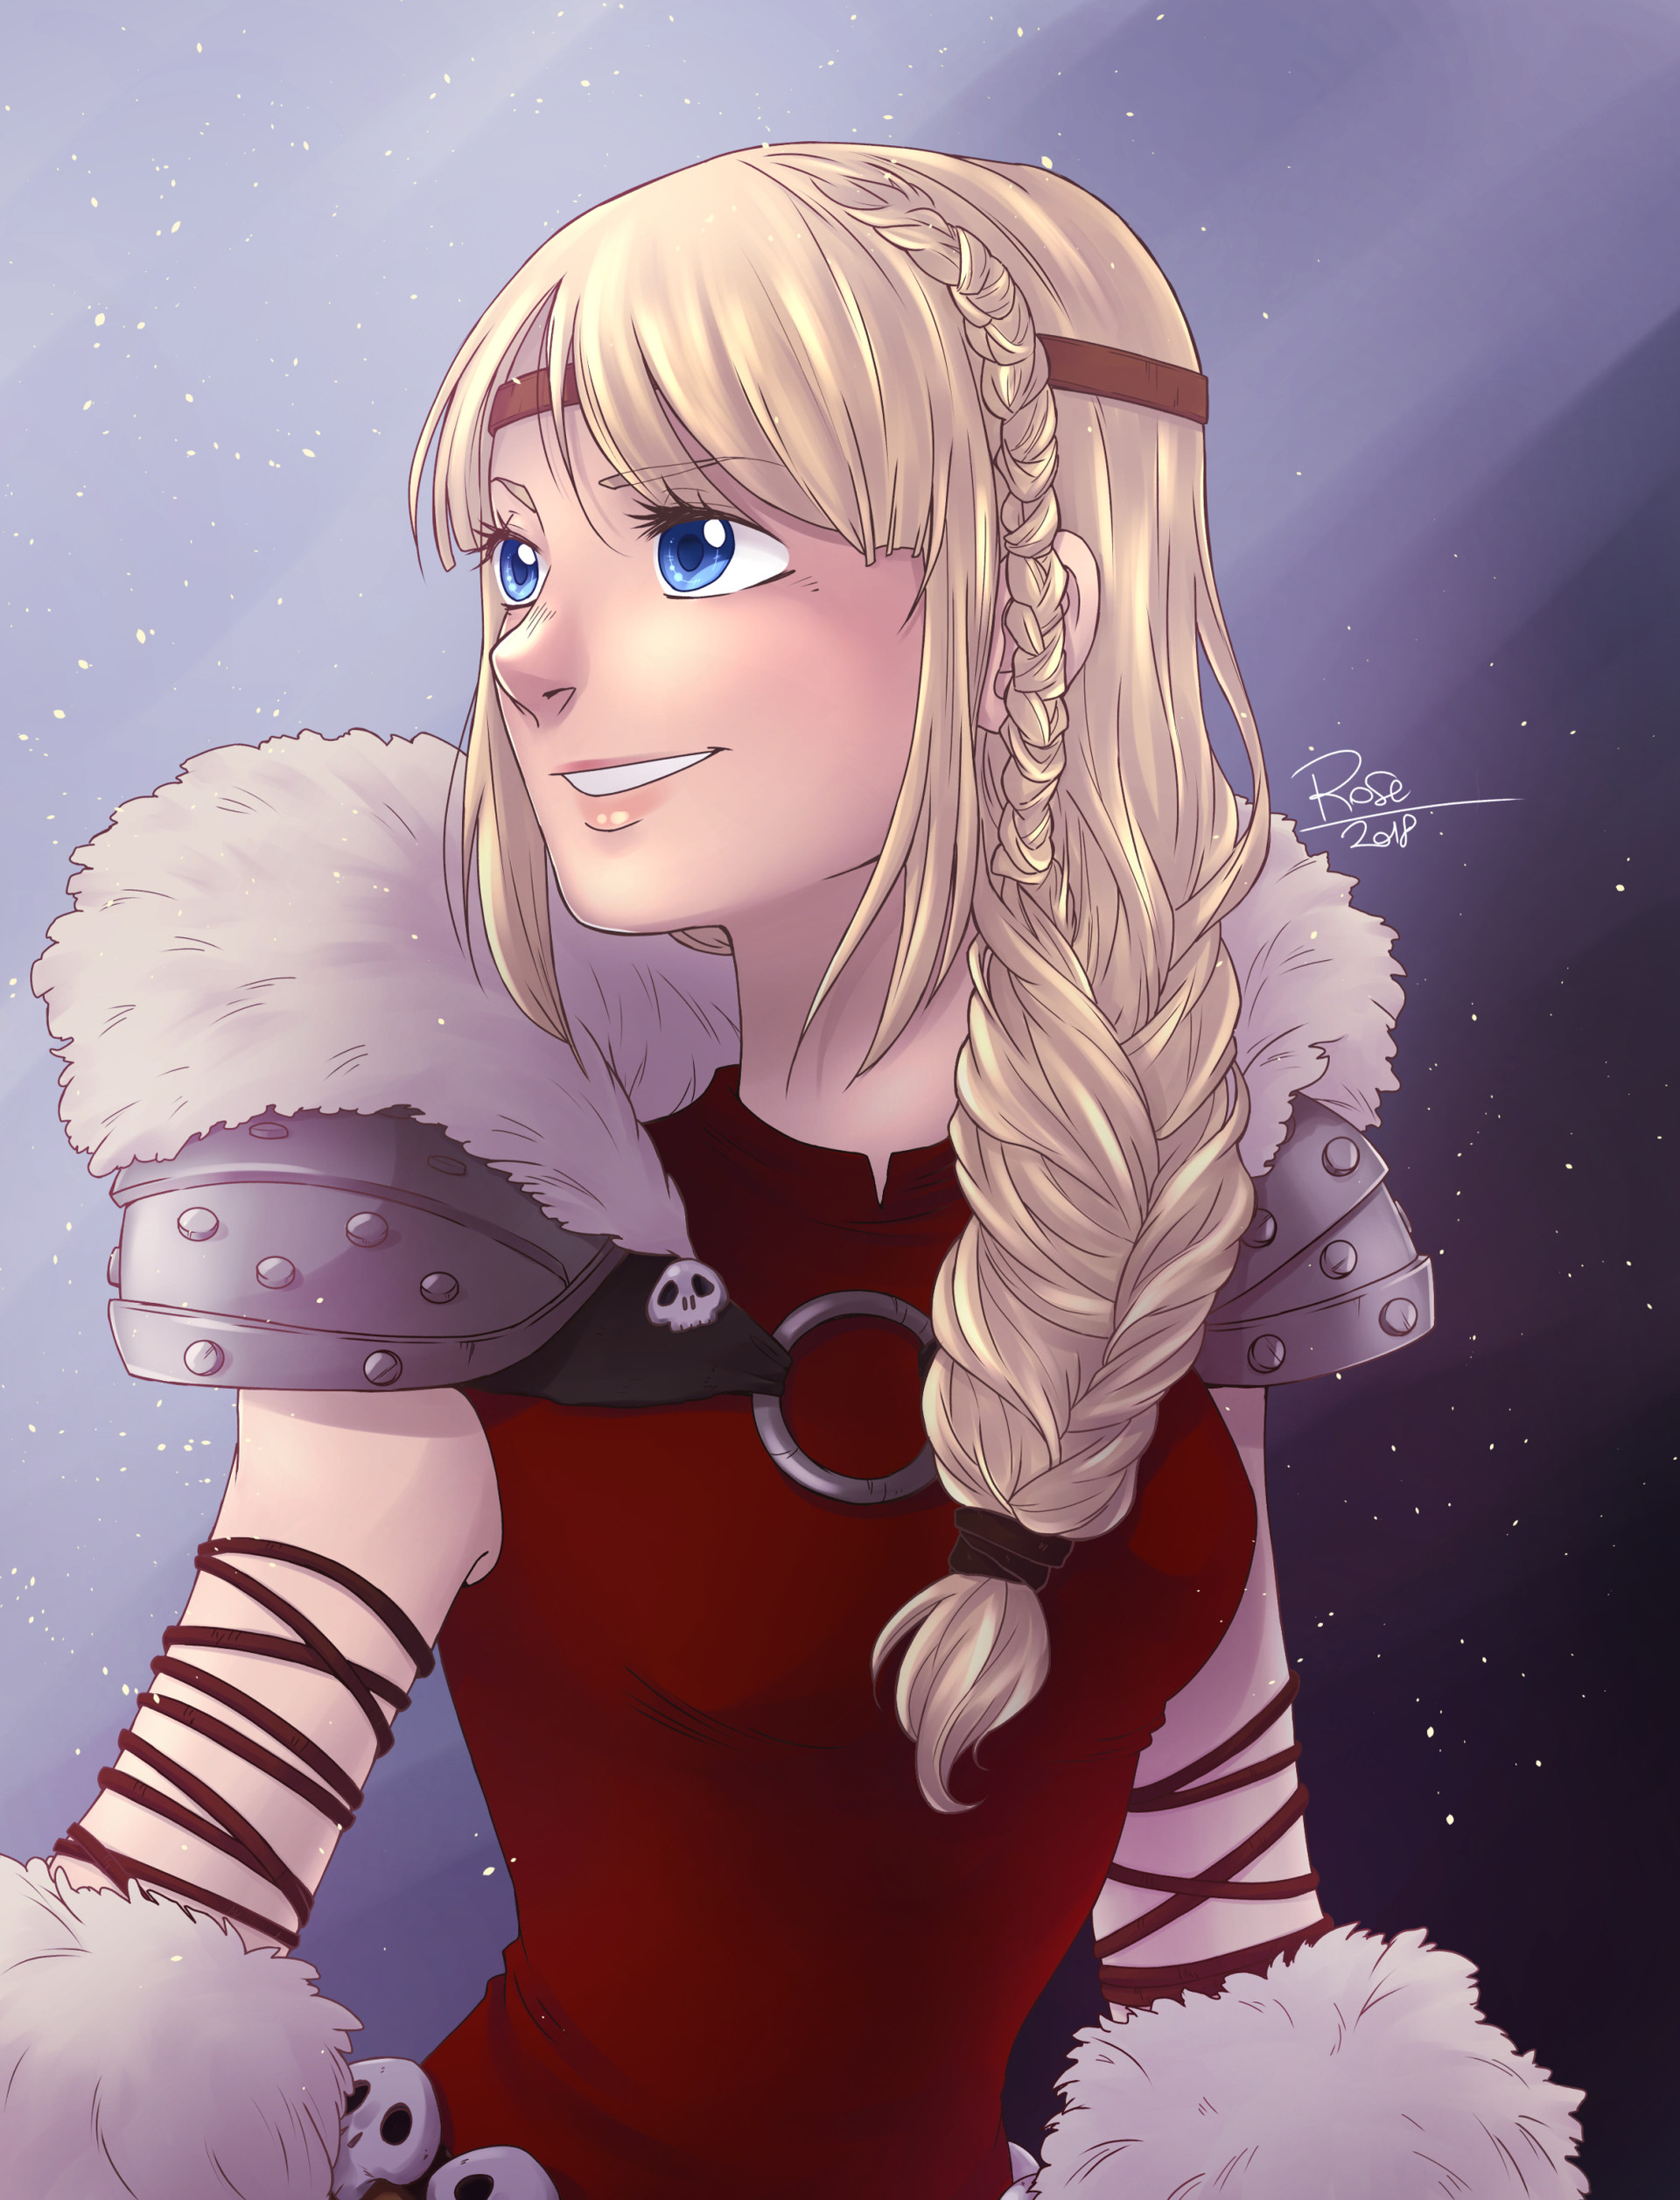 Astrid - How to Train Your Dragon Fan art.